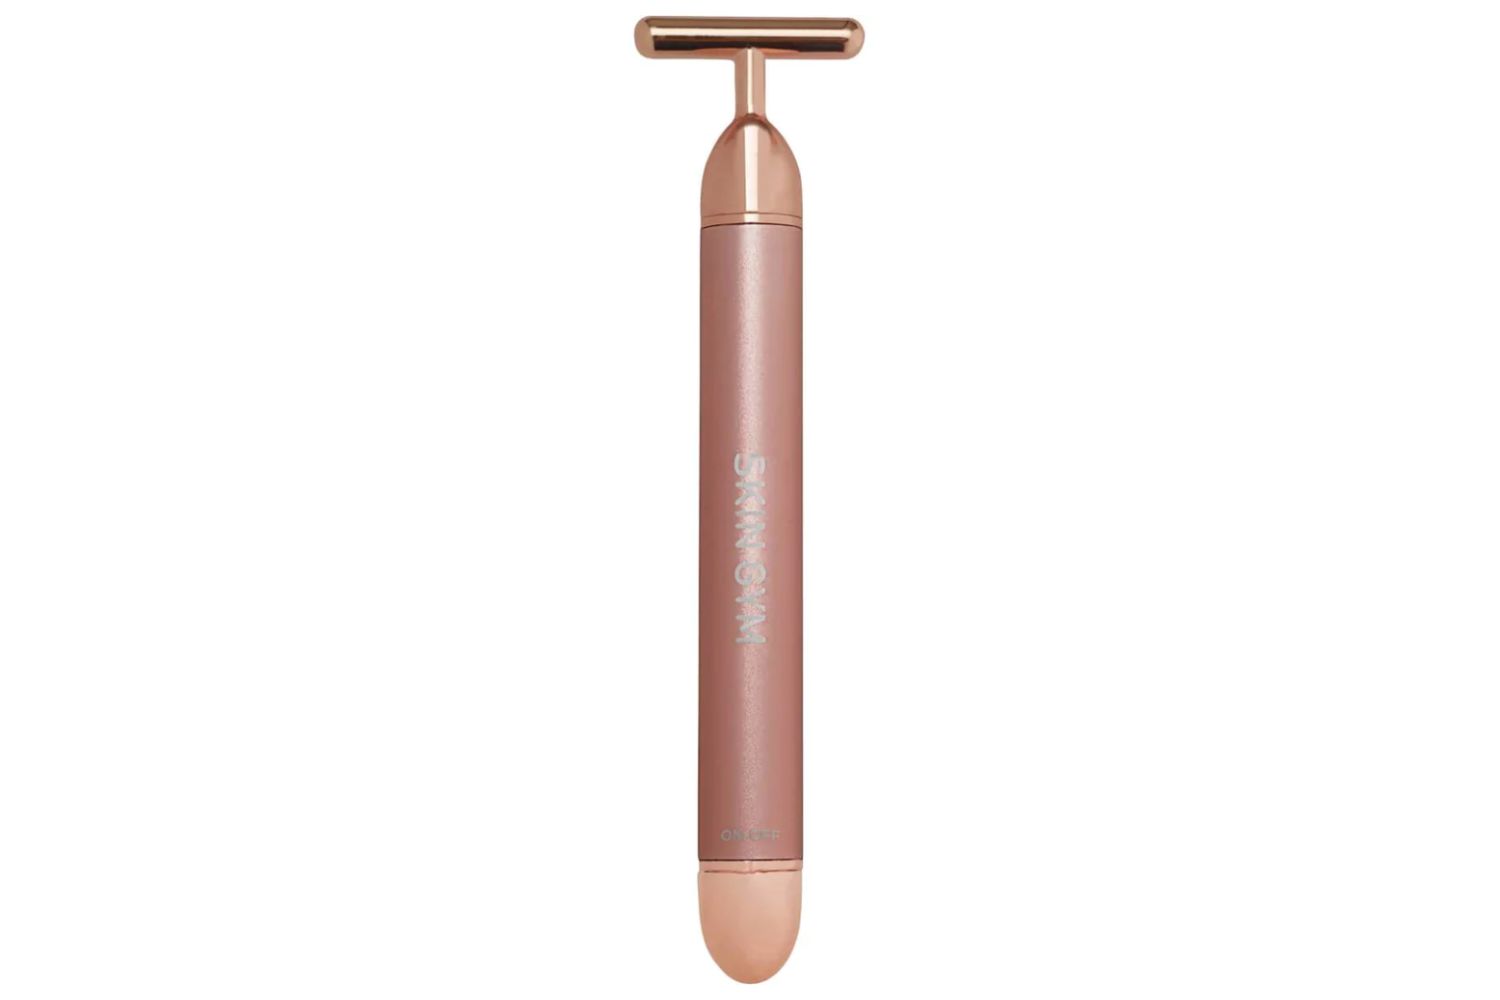 The Skin Gym Beauty Lifter Vibrating T Bar is designed to sculpt and lift facial muscles.